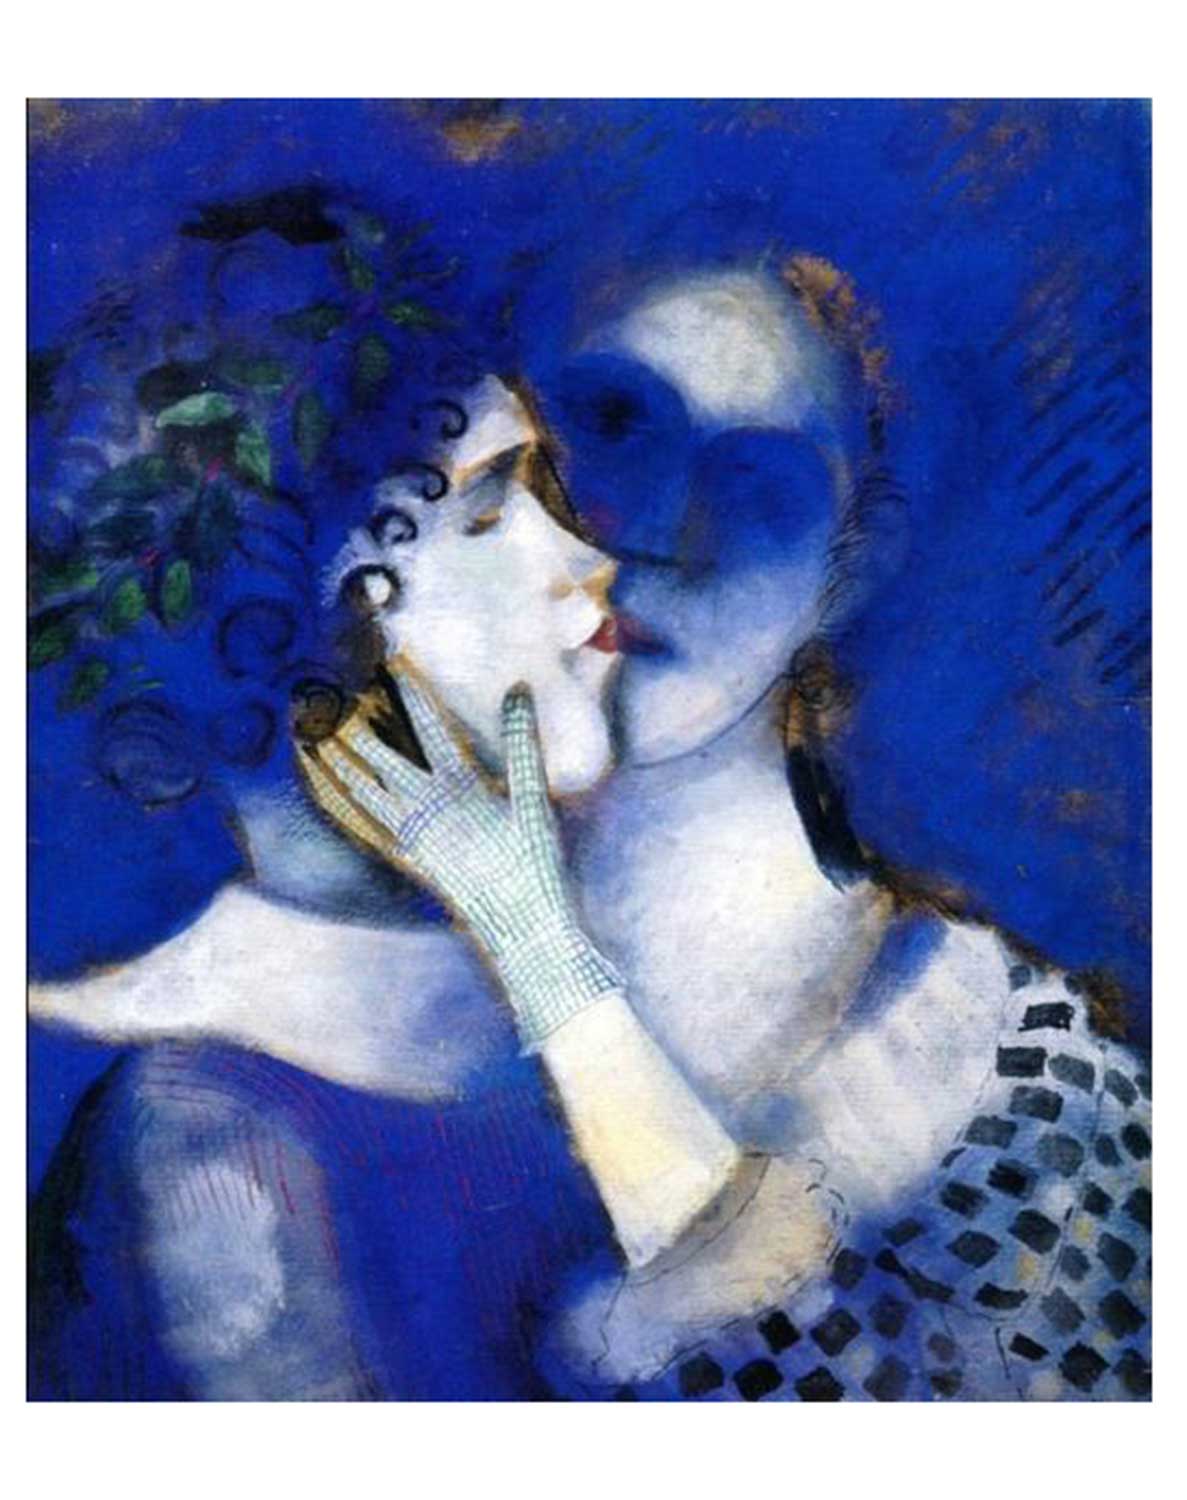 Marc Chagall, Blue Lovers, 1914 (Image: wikiart.org)